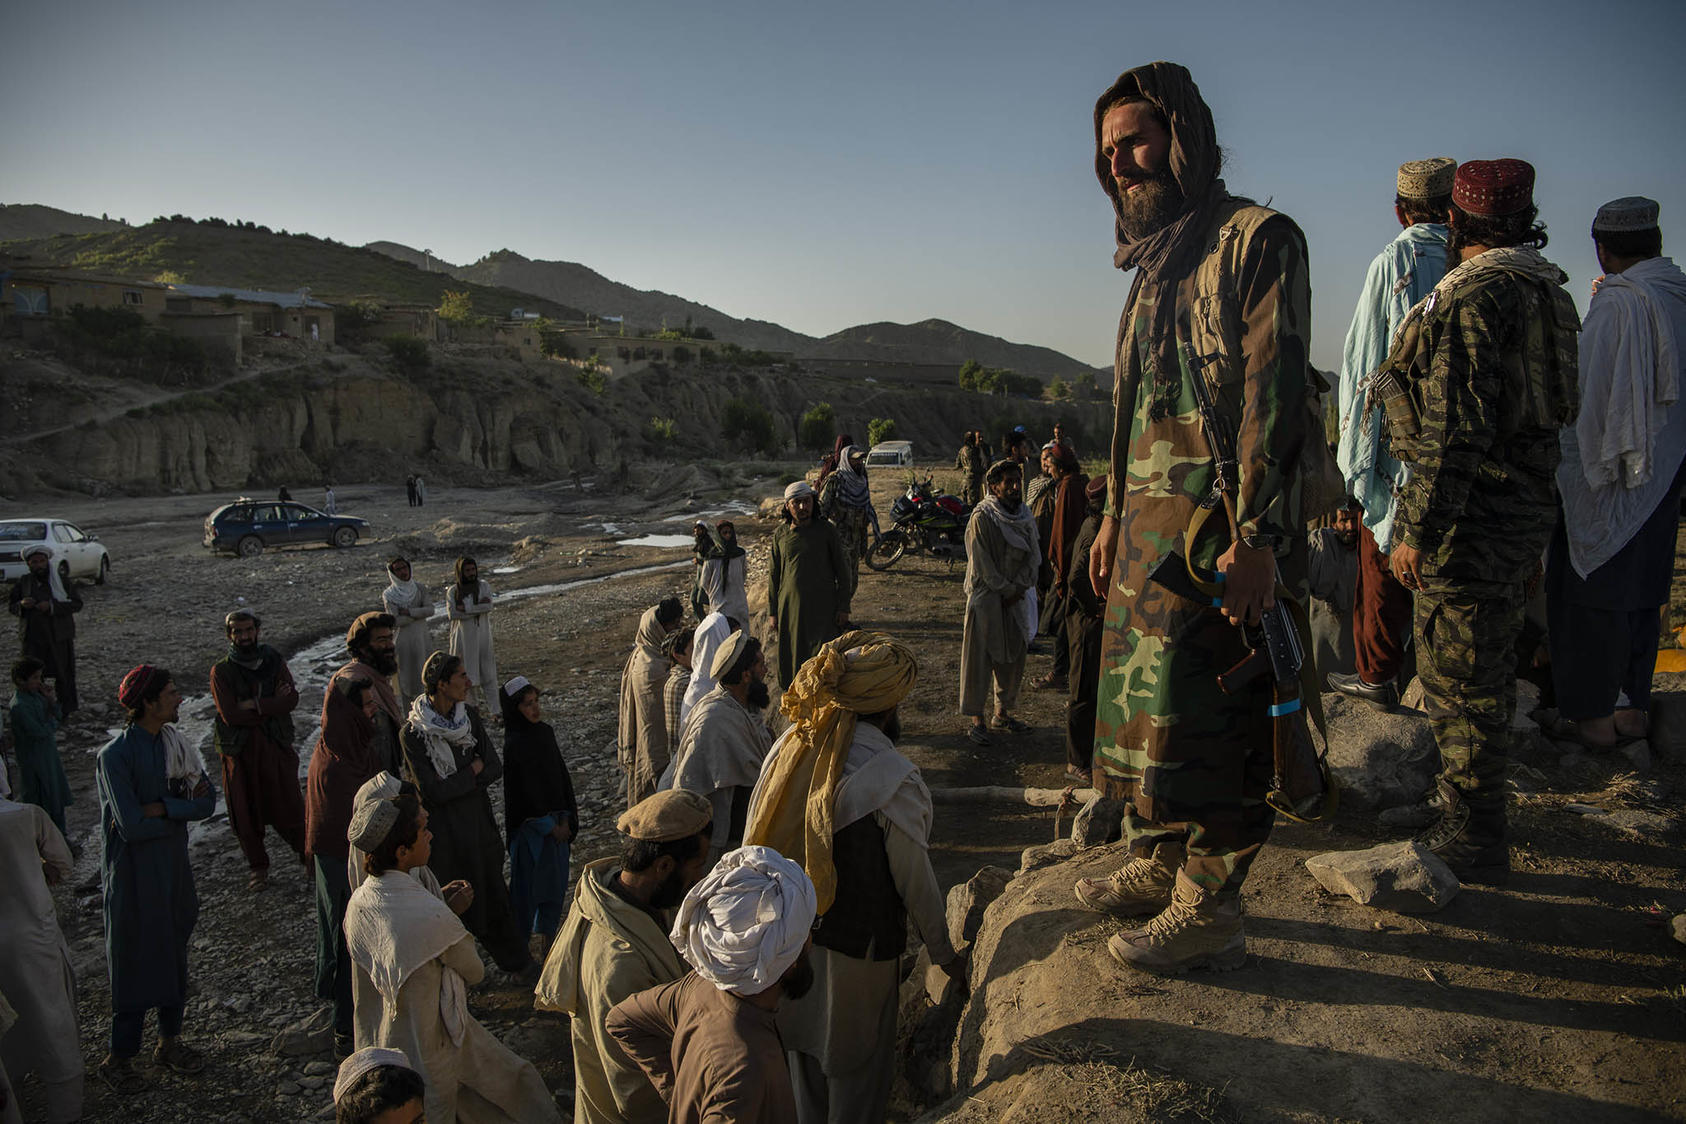 Taliban fighters guard an aid site and give instructions to survivors of the earthquake, in the Gayan district of Afghanistan, June 24, 2022. (Kiana Hayeri/The New York Times)